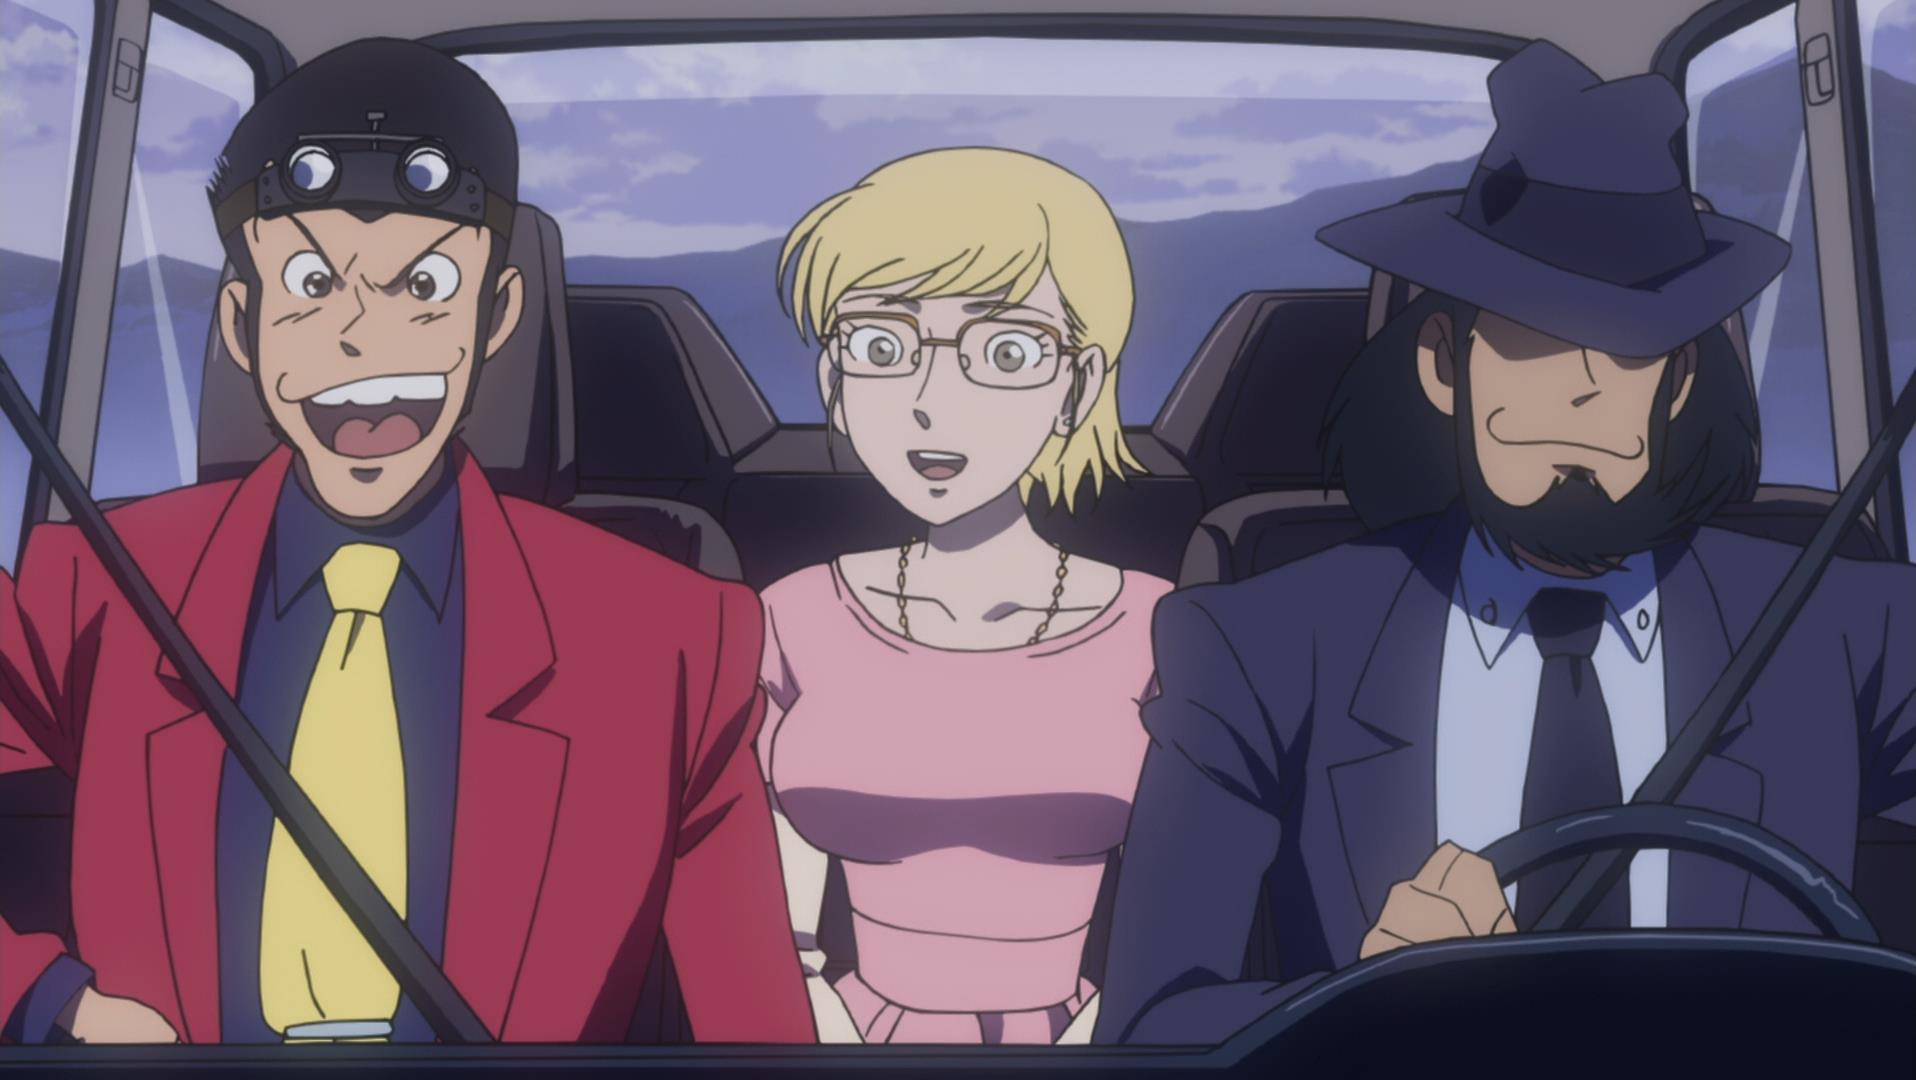 landlord Enumerate Gentleman friendly Lupin III: Travels of Marco Polo - Another Page (TV Special) Review -  AstroNerdBoy's Anime & Manga Blog | AstroNerdBoy's Anime & Manga Blog